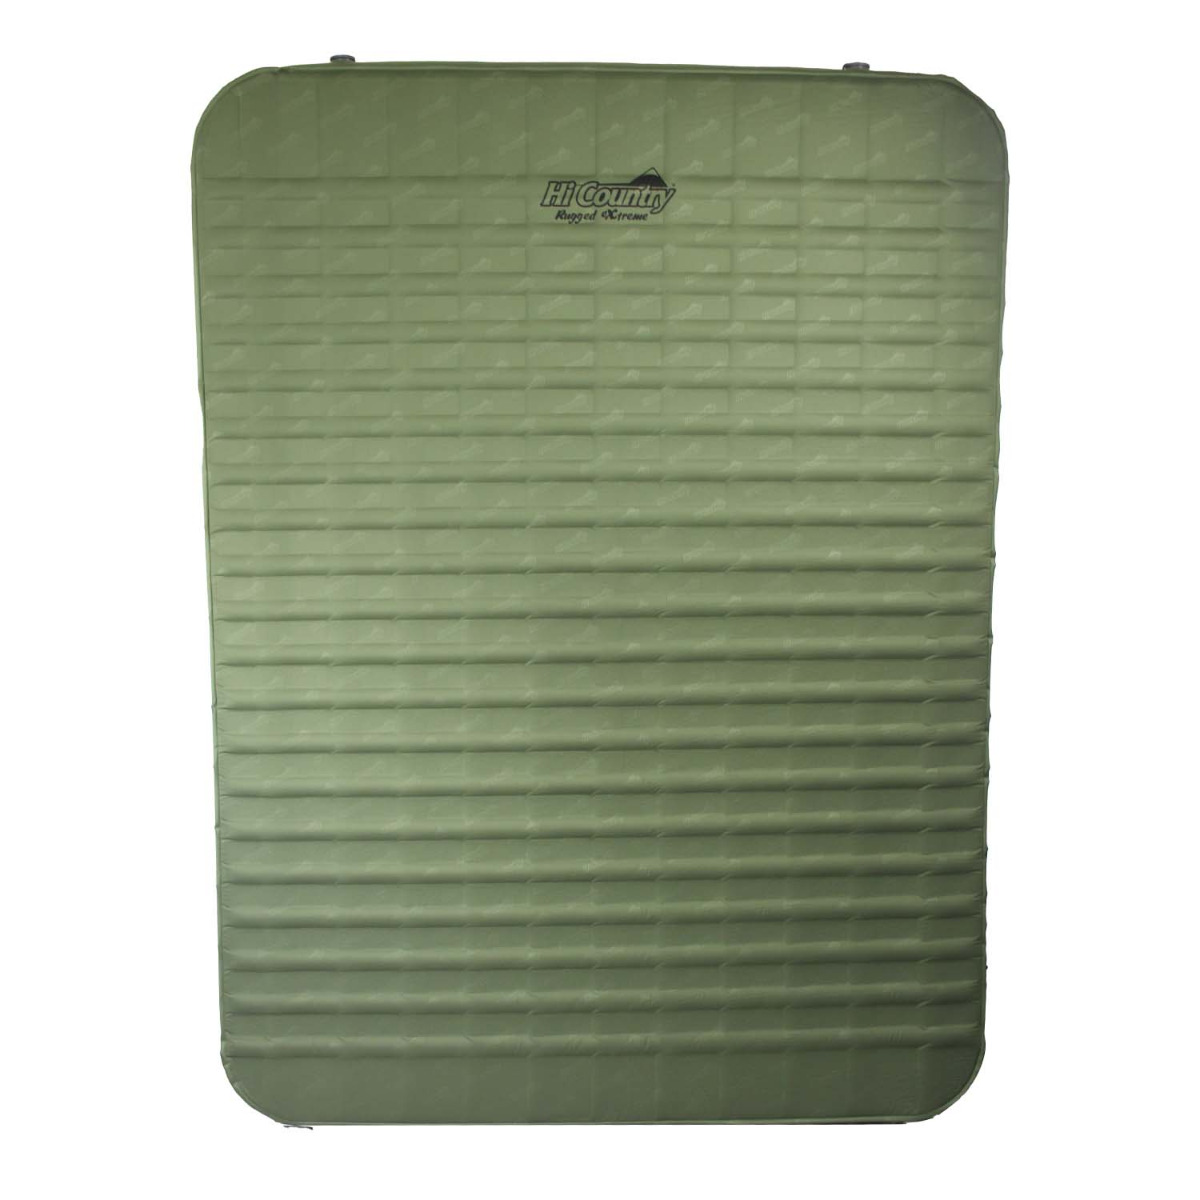 HI-COUNTRY RUGGED EXTREME 4WD MAT QUEEN